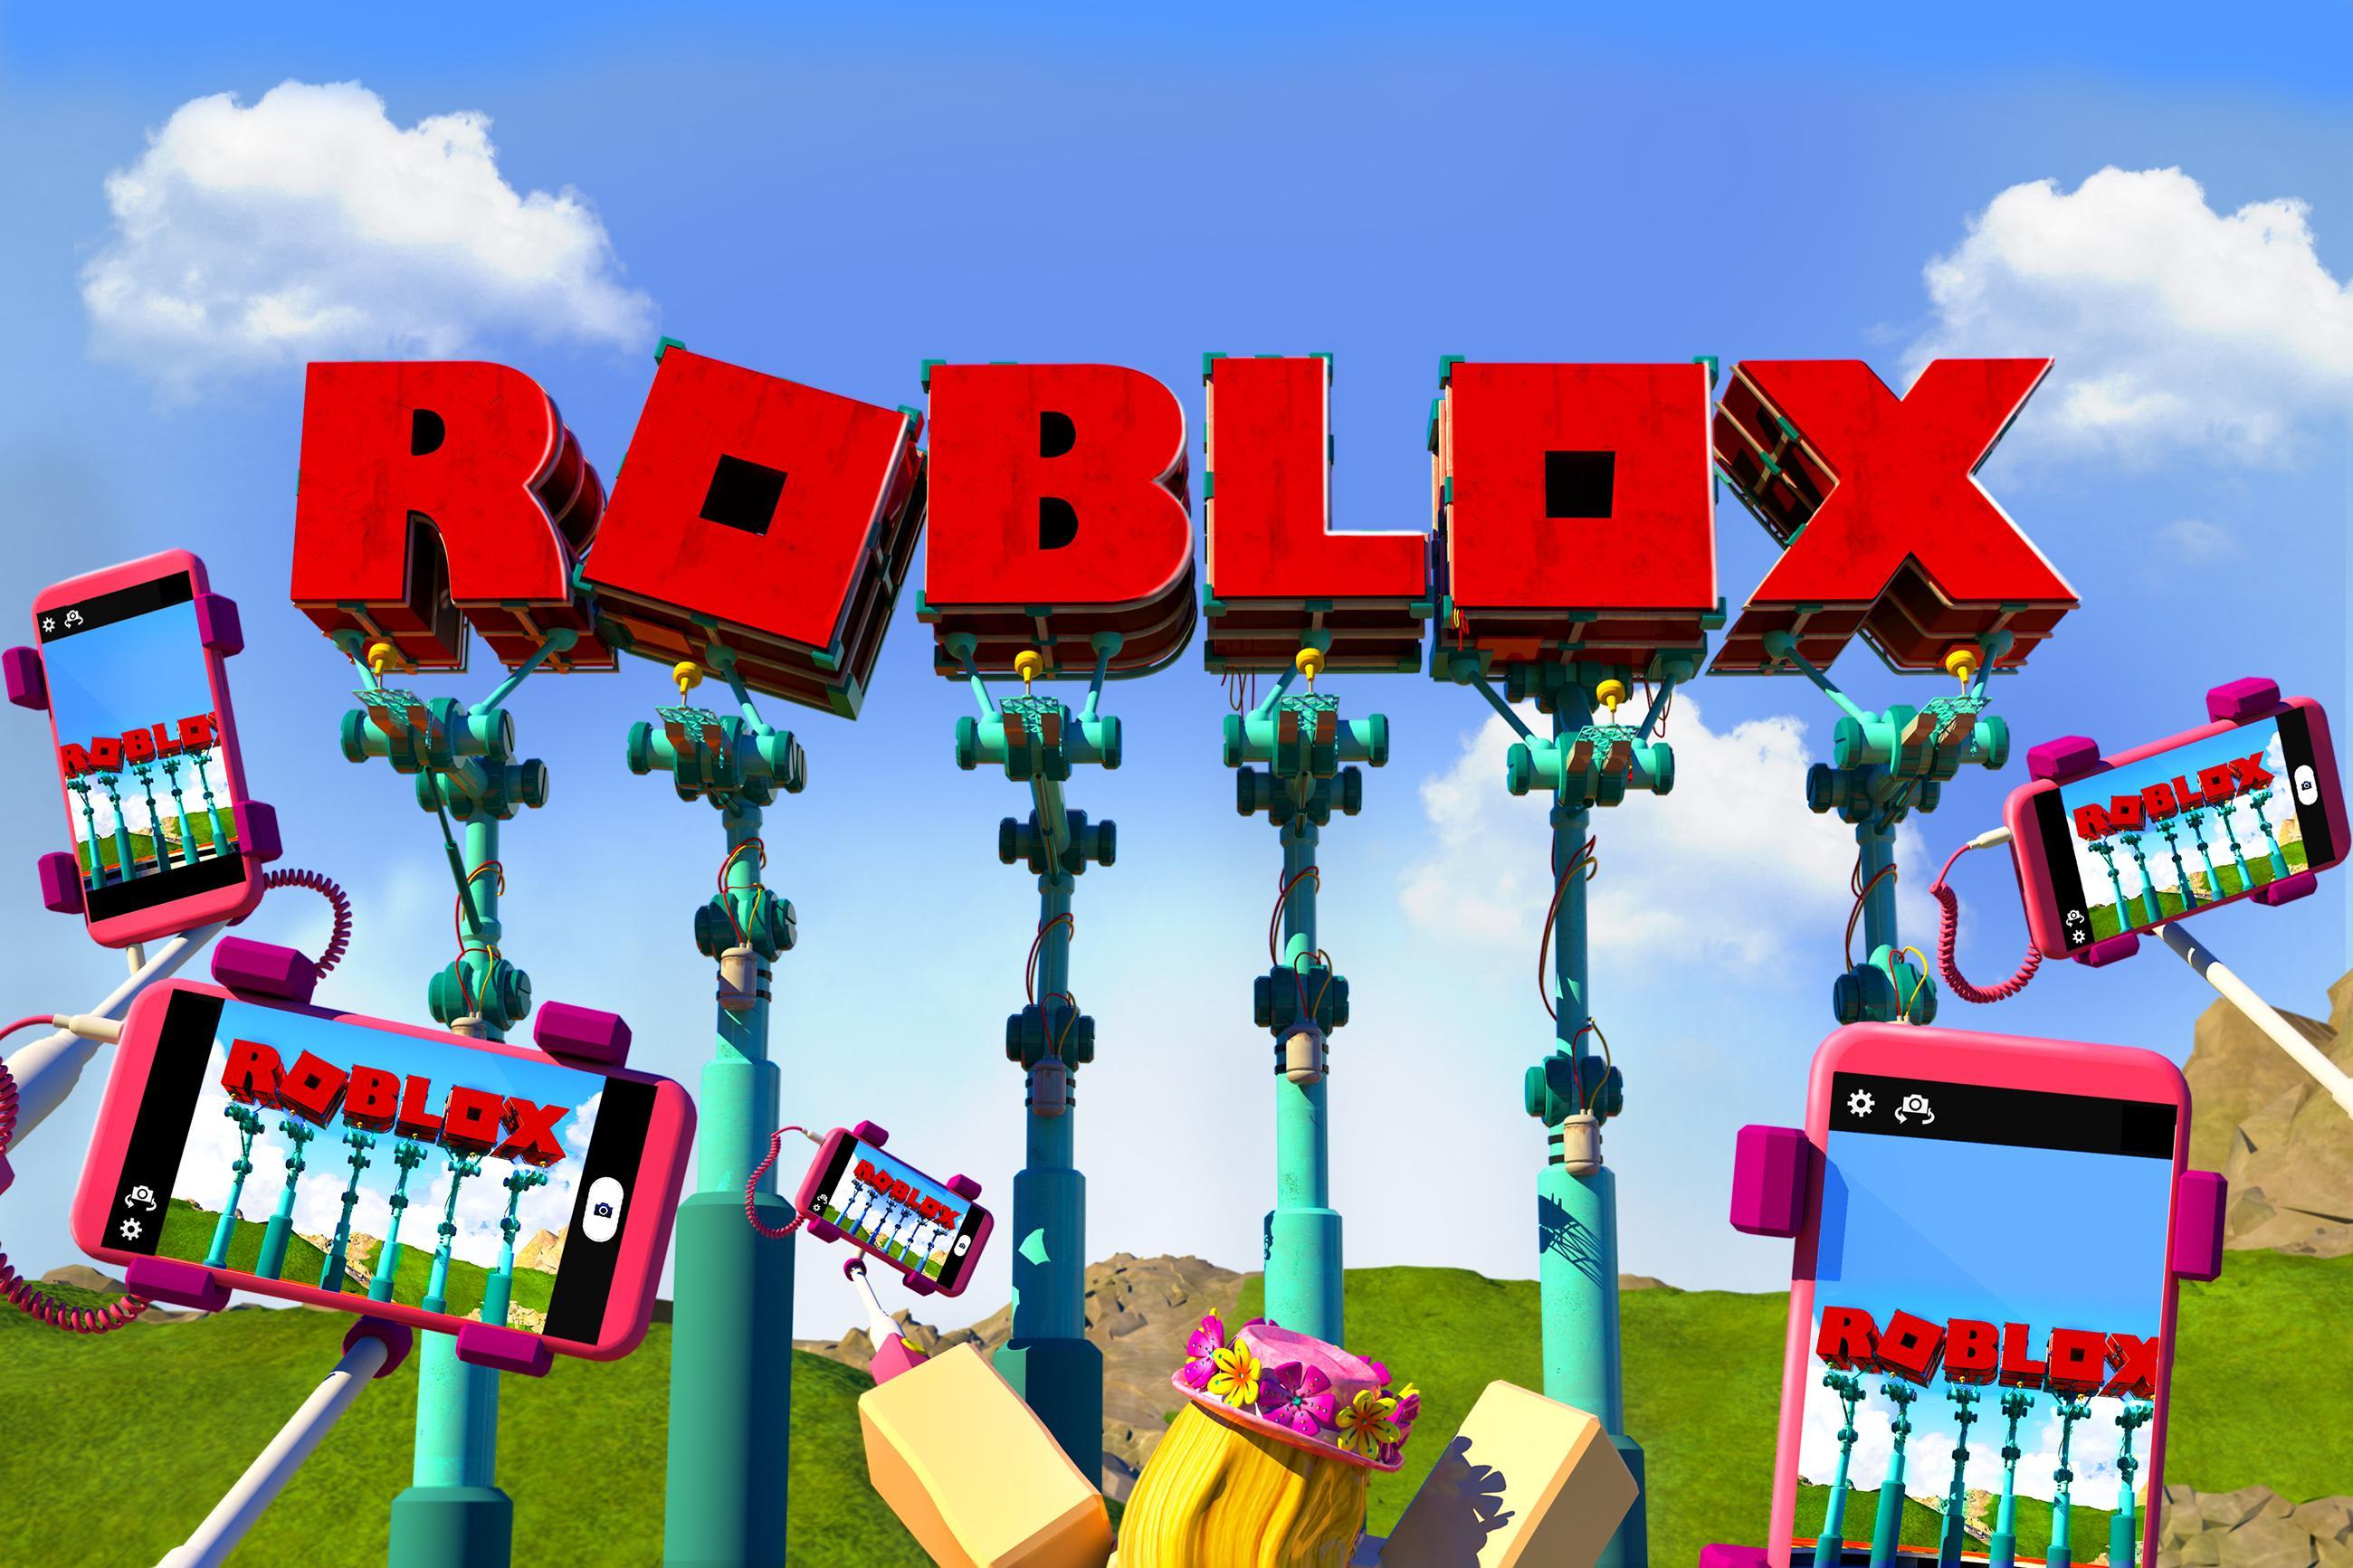 Roblox Wallpapers 2018 Hd For Android Apk Download - roblox backgrounds